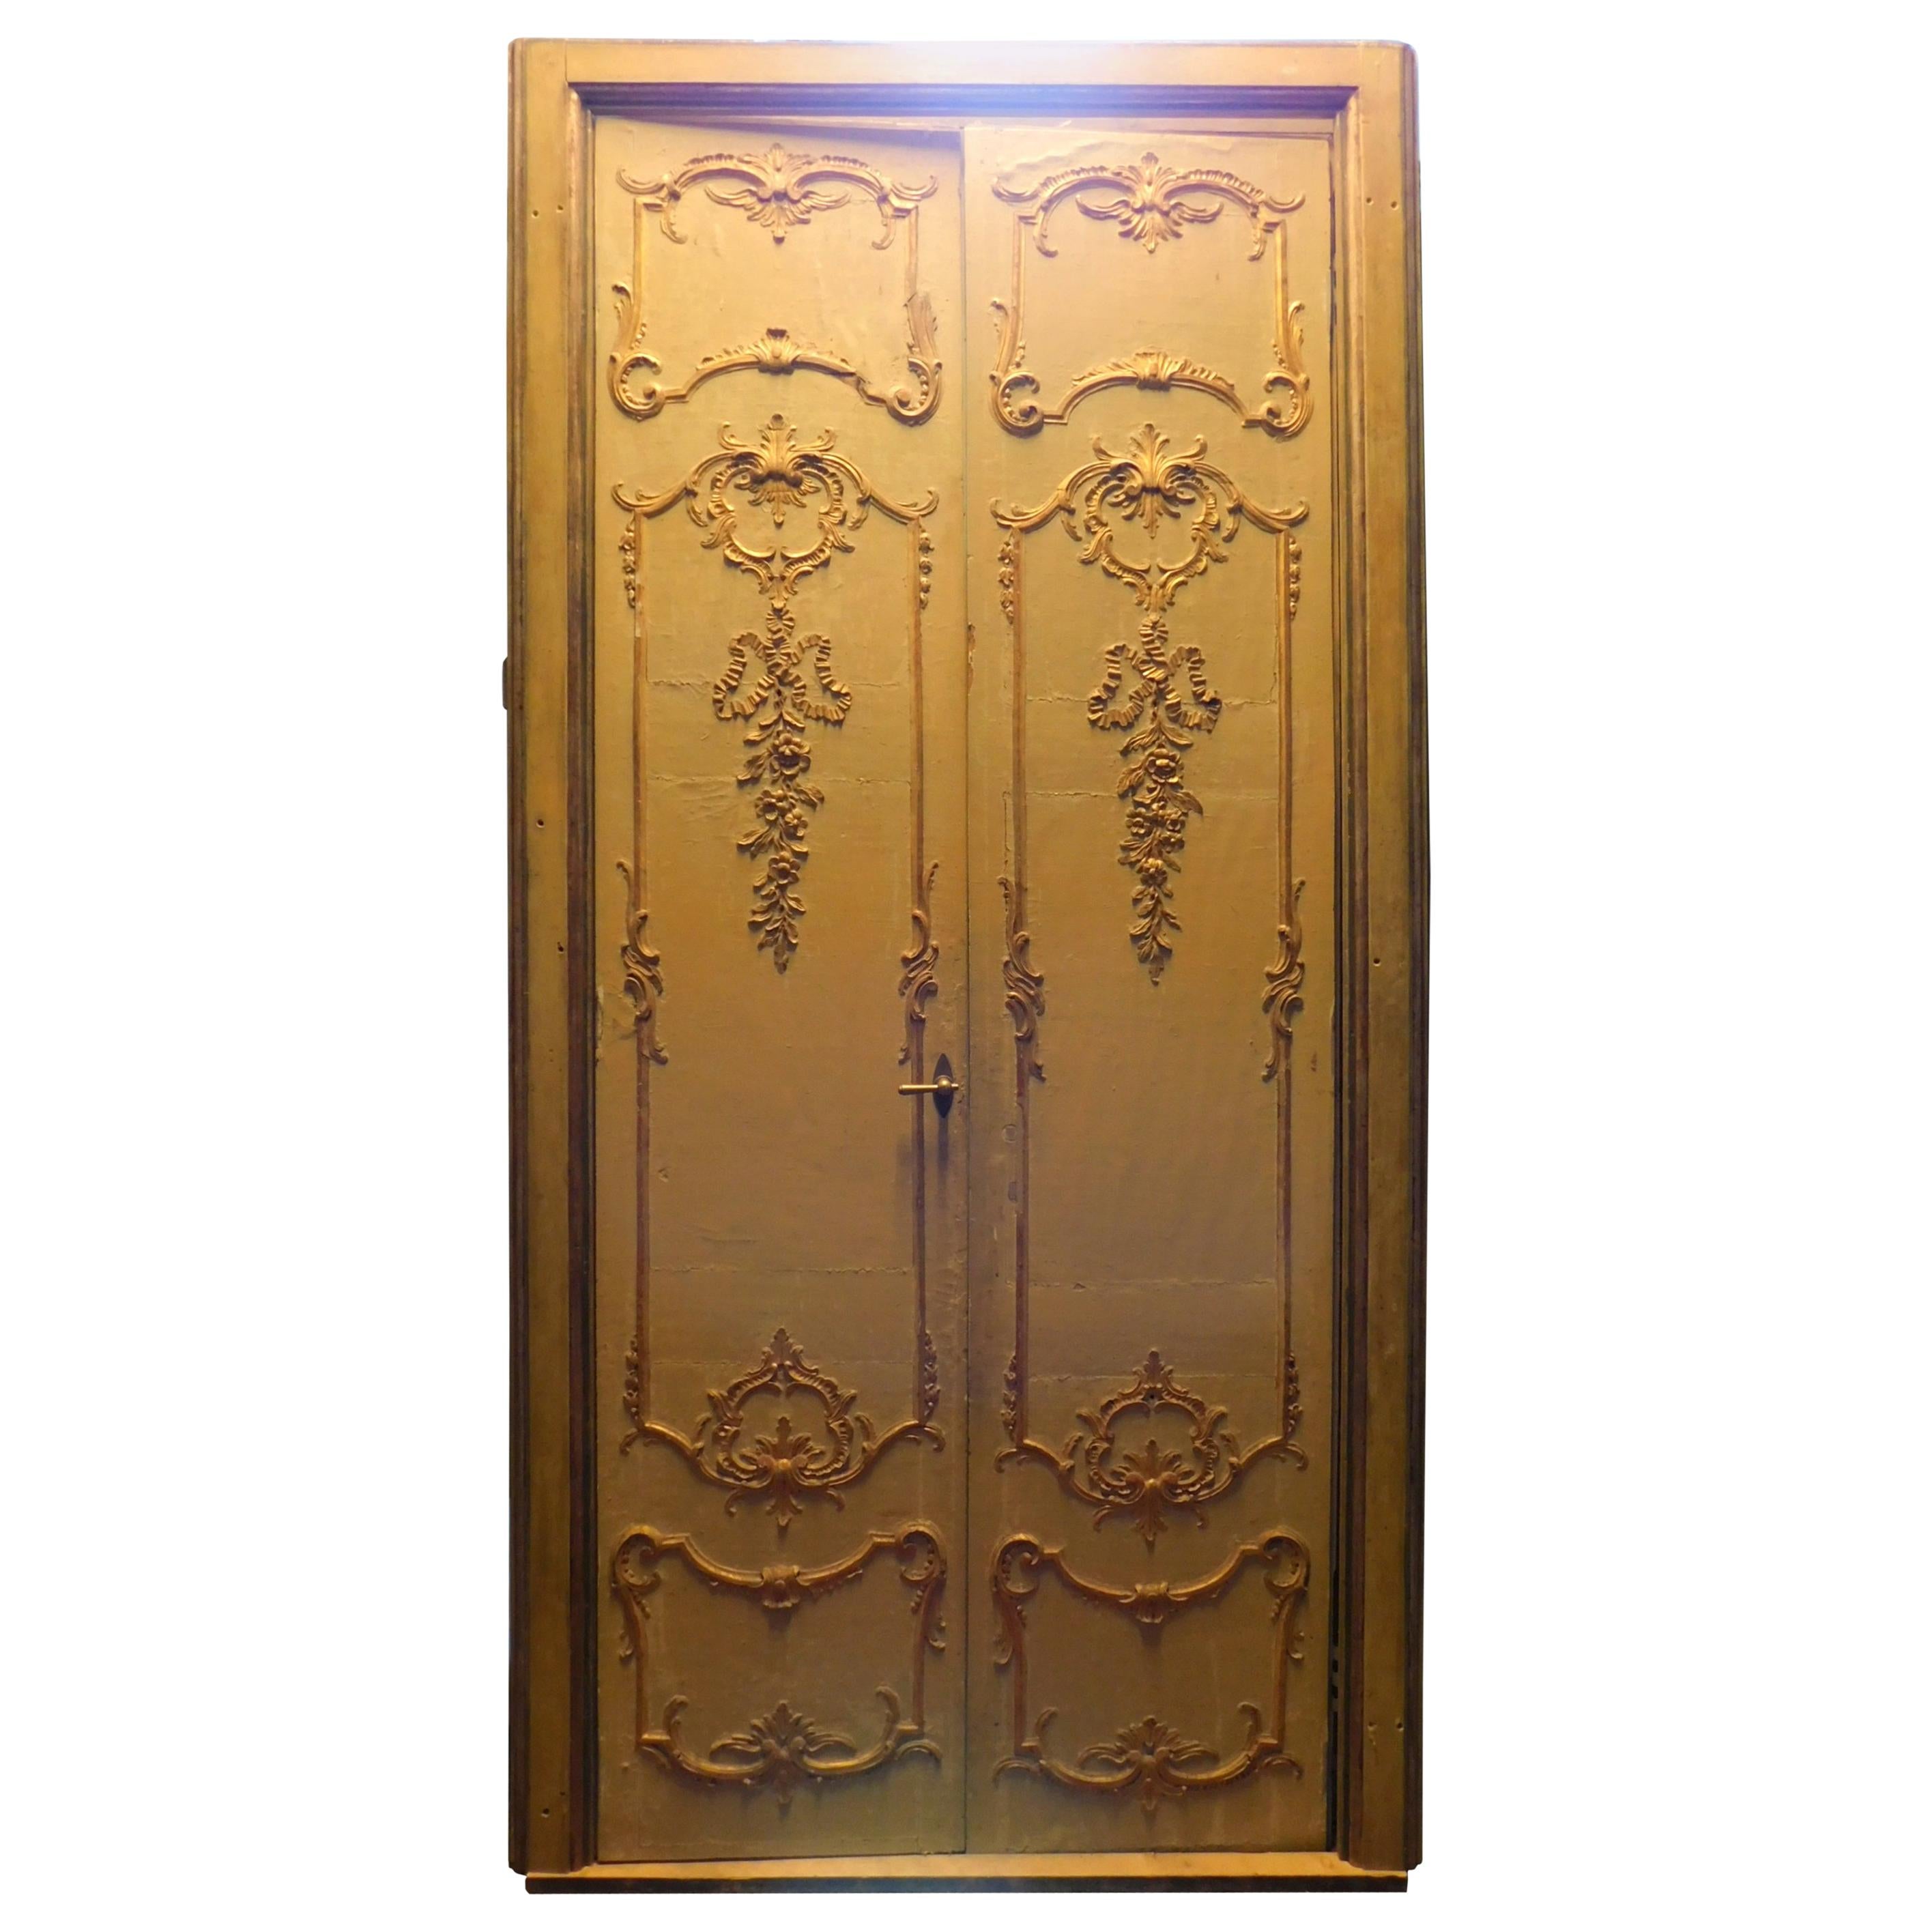 Antique Lacquered and Gilded Double Door with Frame, 19th Century, Milan 'Italy'